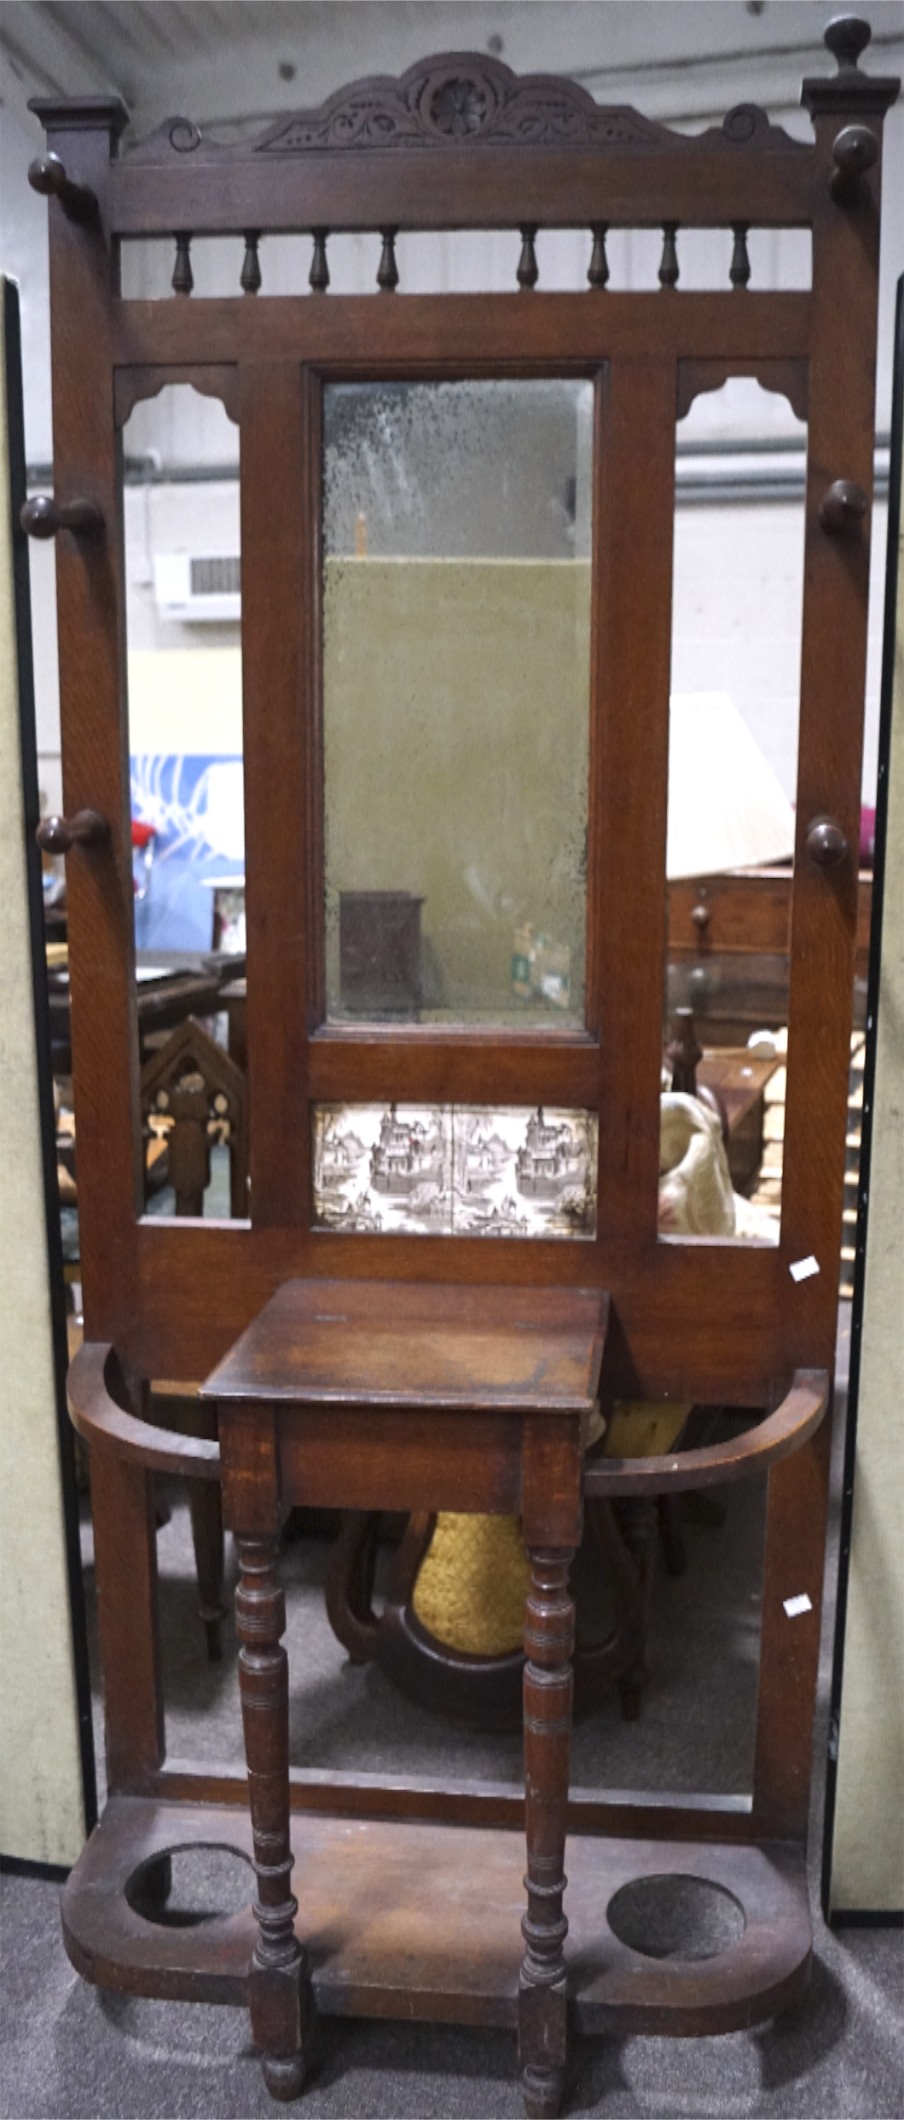 An Edwardian coat stick stand, with mirrored back and six coat pegs, above a central glove box,